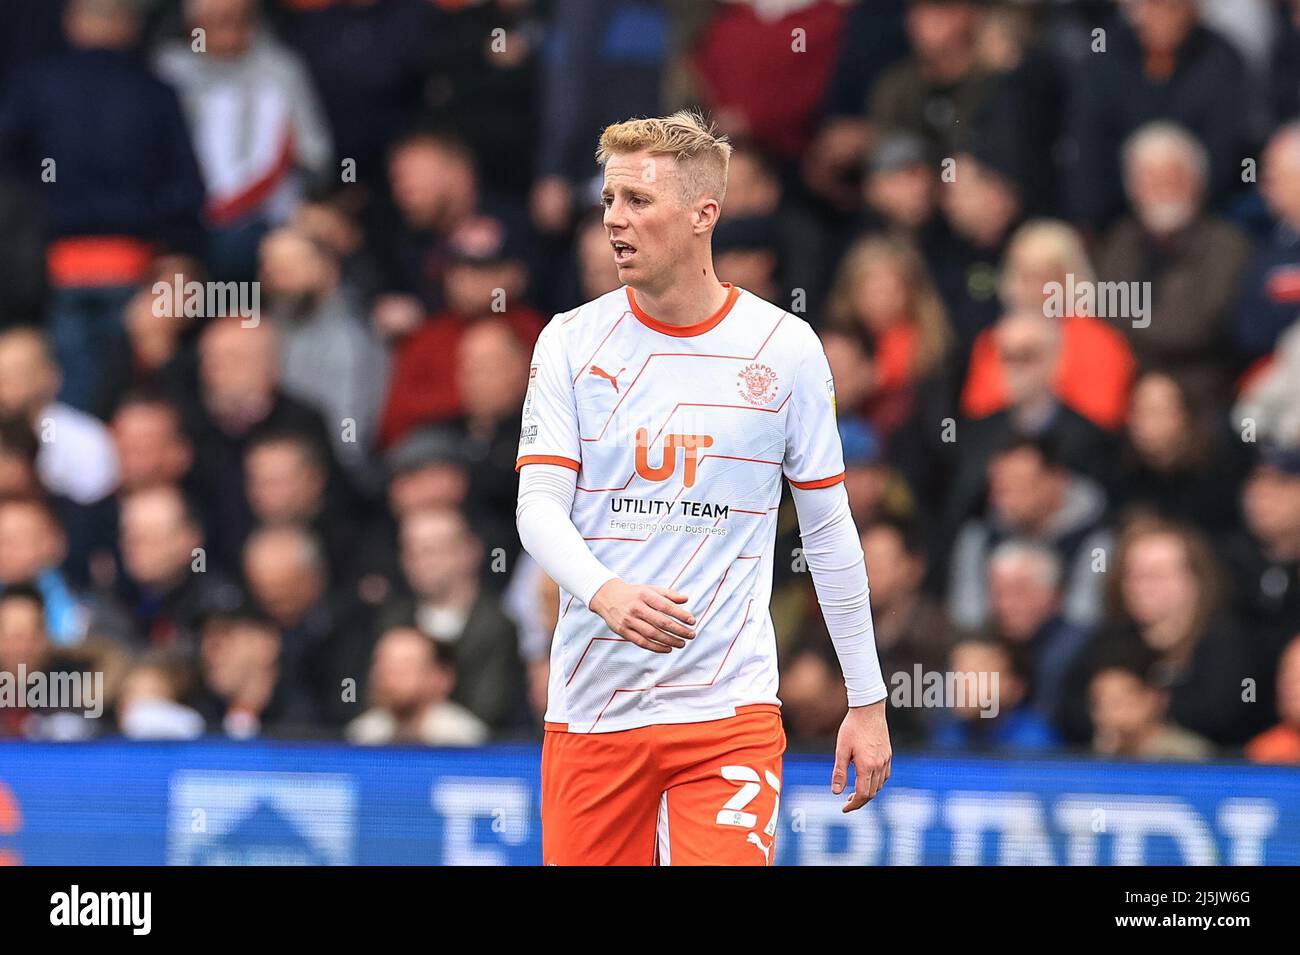 Charlie Kirk #27 of Blackpool during the game in Luton, United Kingdom on 4/24/2022. (Photo by Mark Cosgrove/News Images/Sipa USA) Stock Photo